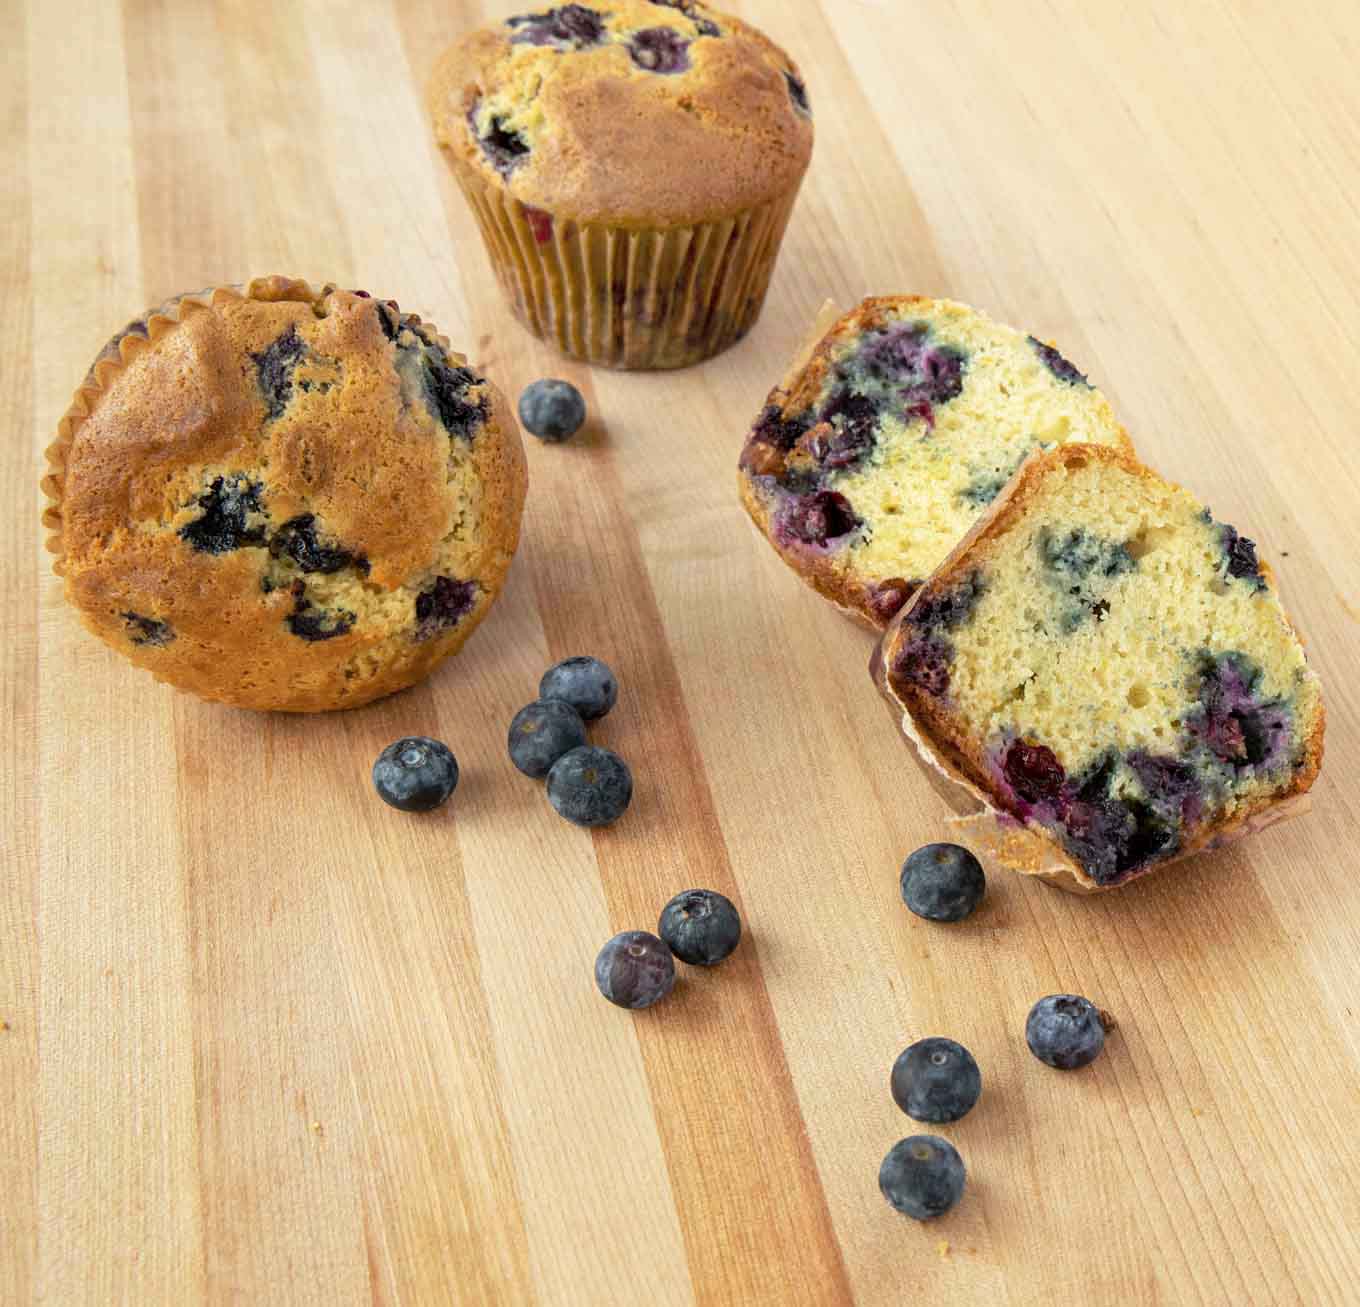 2 blueberry muffins and one muffin cut in half on a wooden cutting board with blueberries